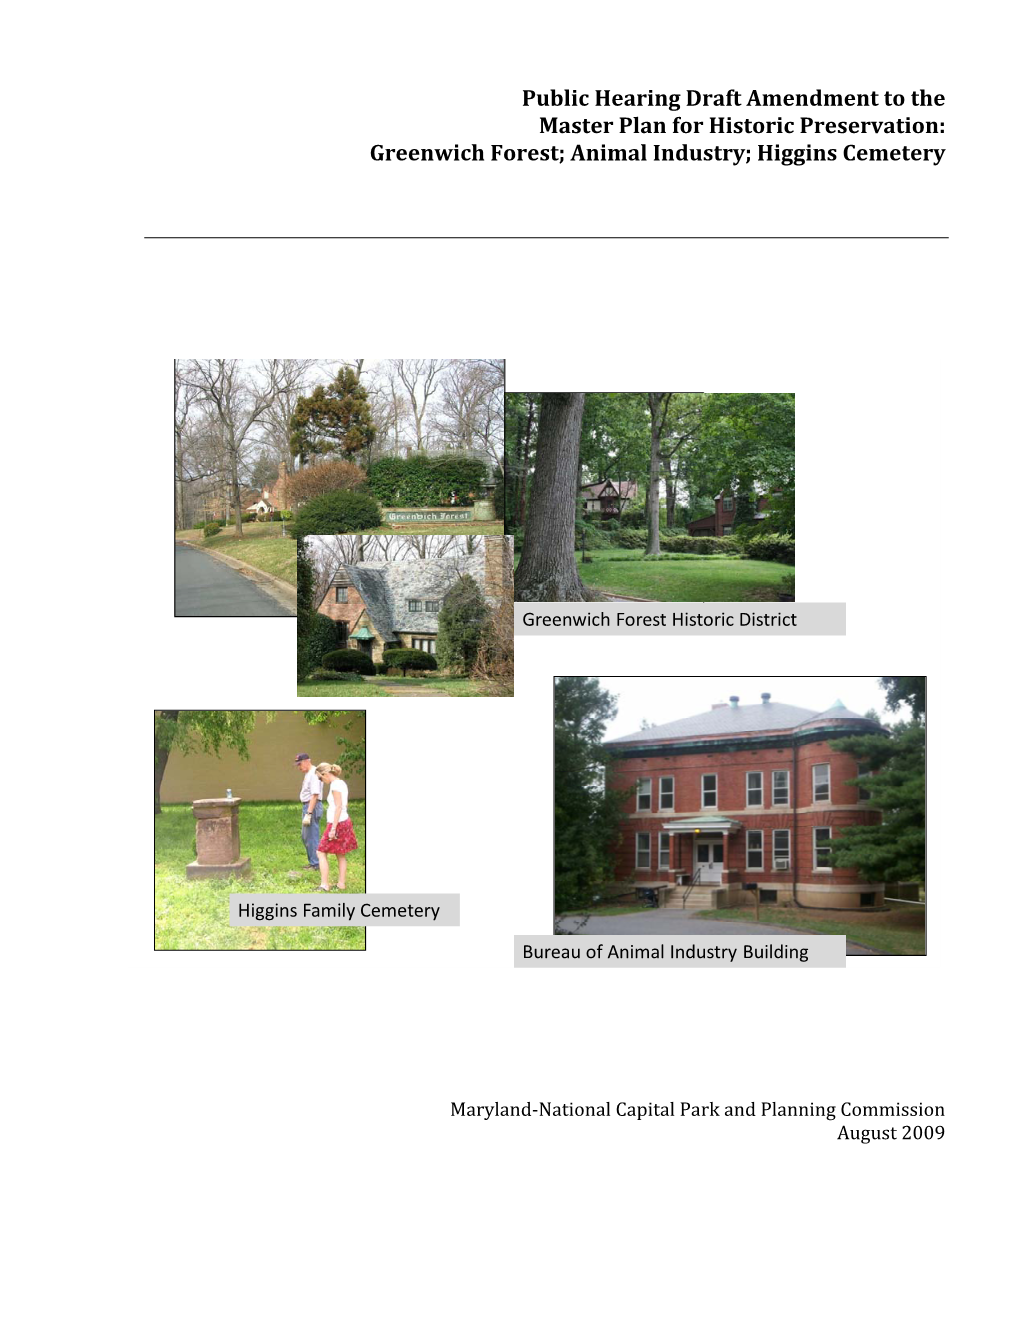 Public Hearing Draft Amendment to the Master Plan for Historic Preservation: Greenwich Forest; Animal Industry; Higgins Cemetery